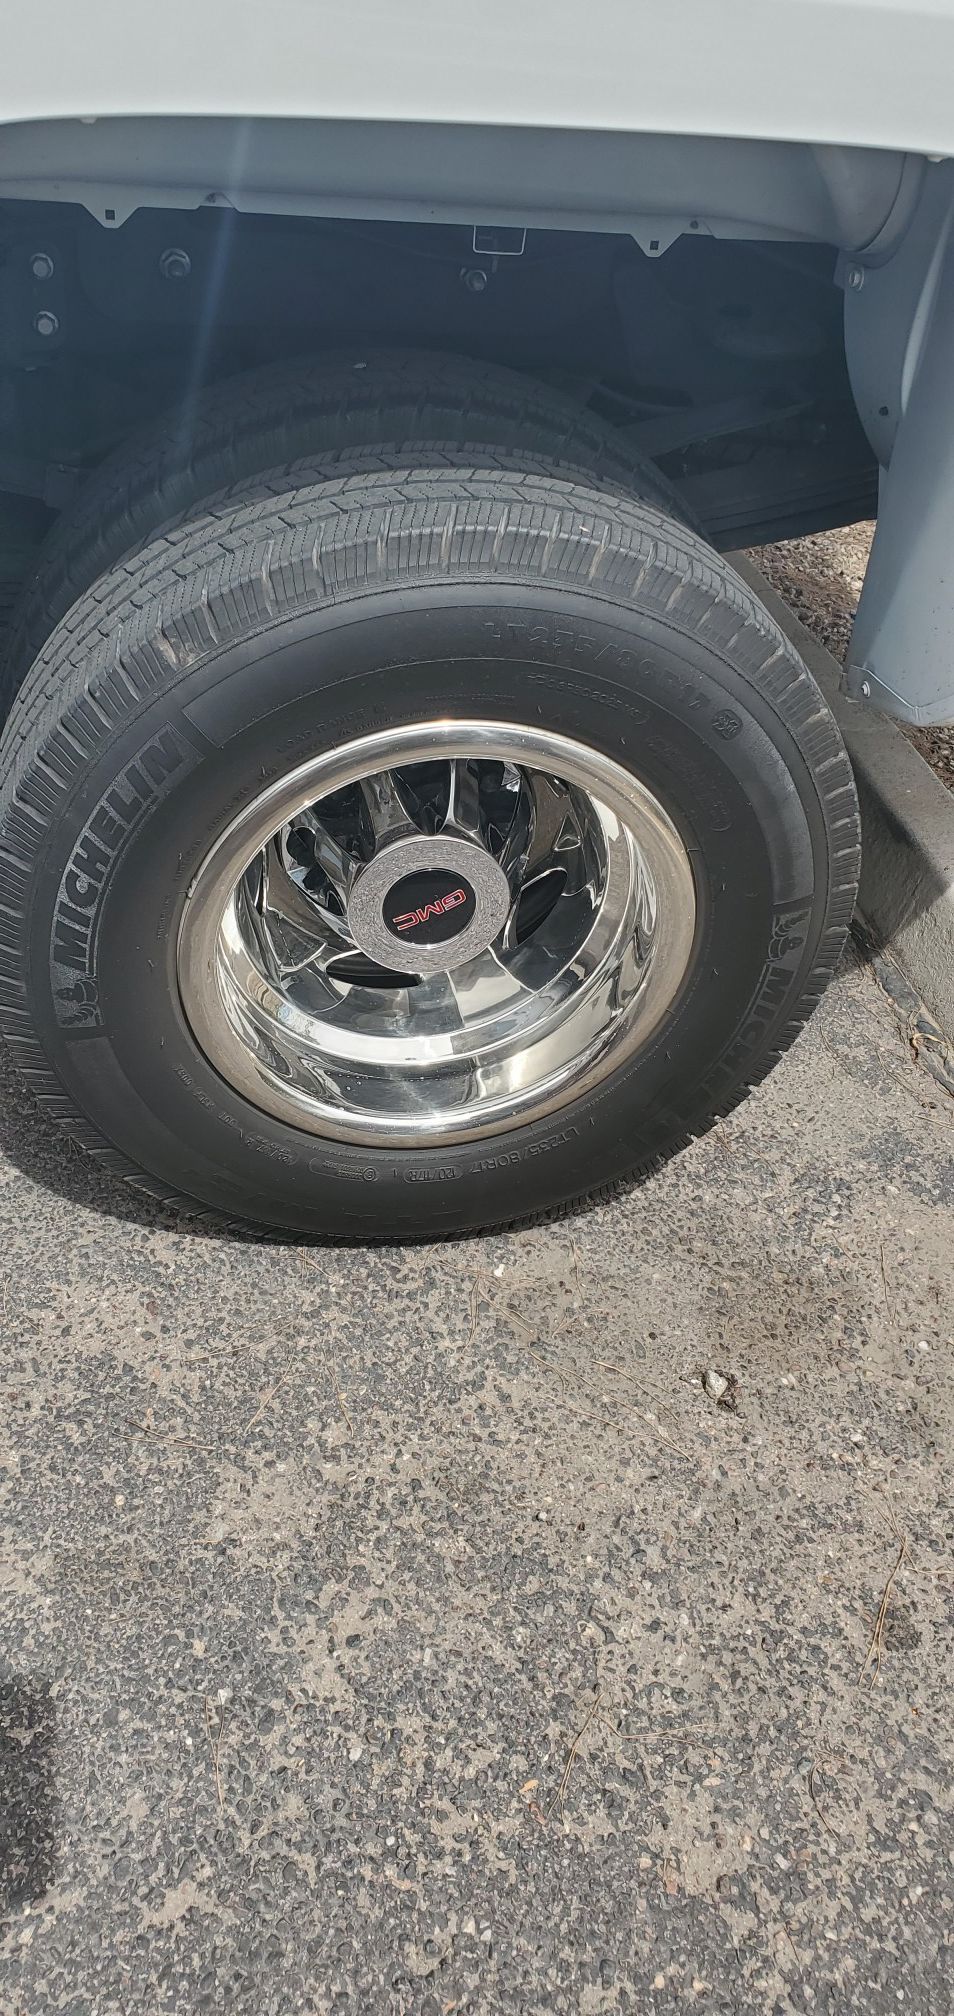 2015 GMC stock aluminum rims and tires with chrome simulator covers